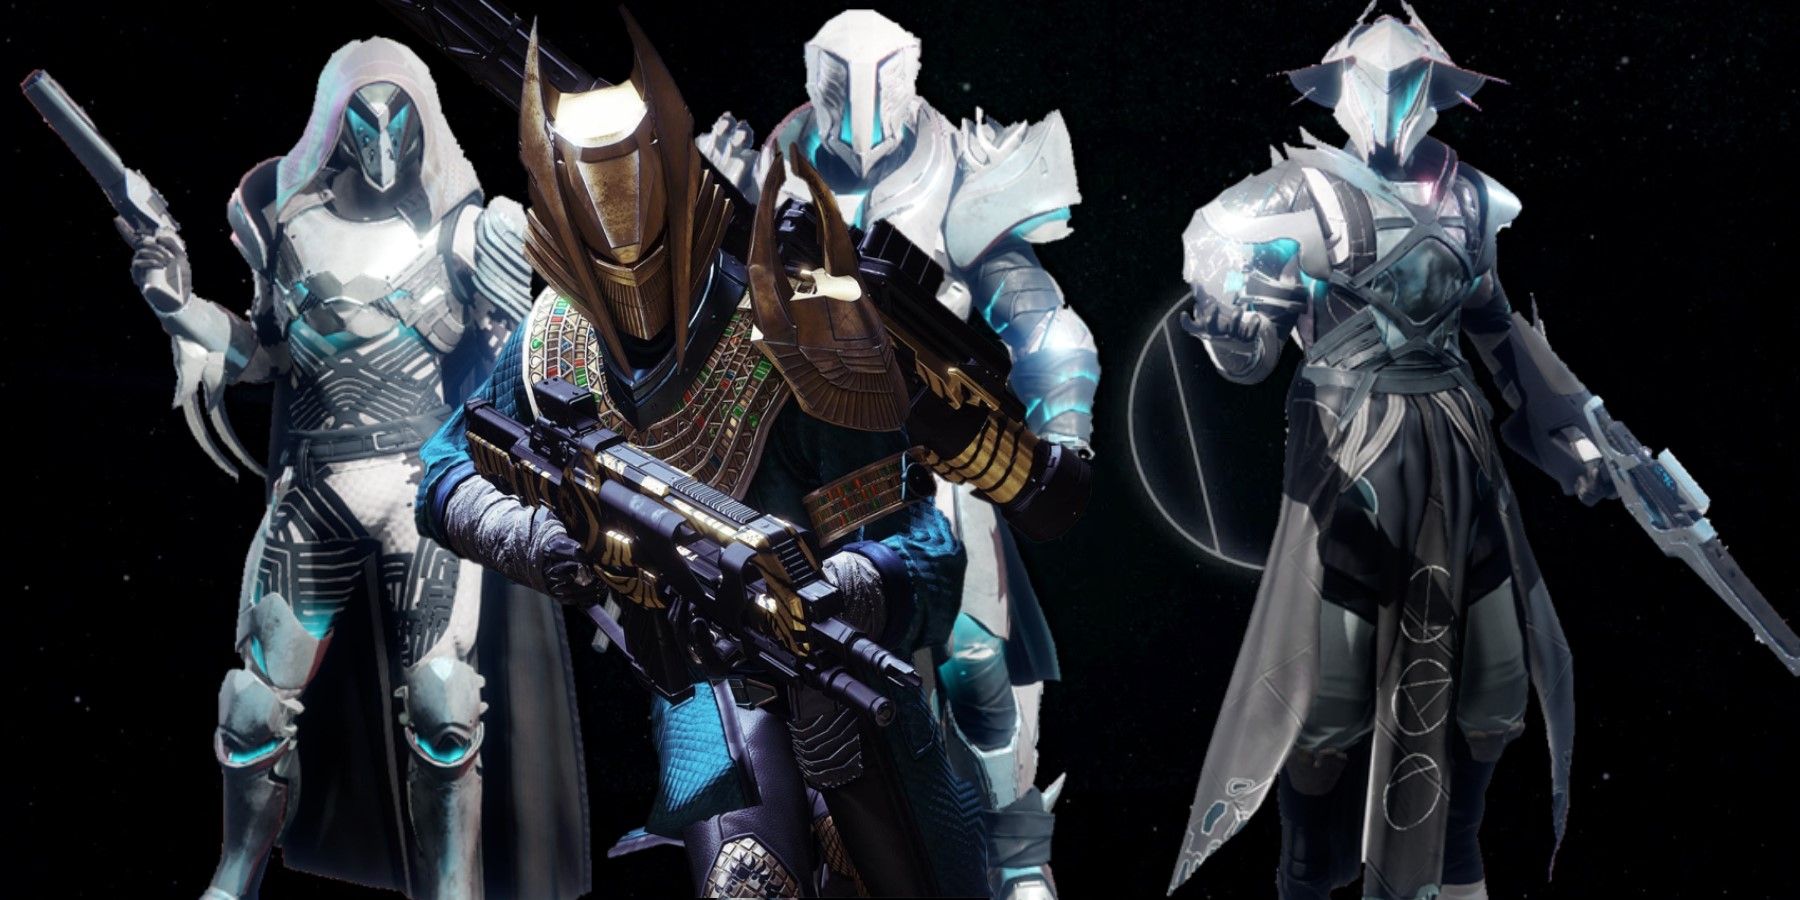 destiny 2 trials of osiris matchmaking changes flawless players unhappy